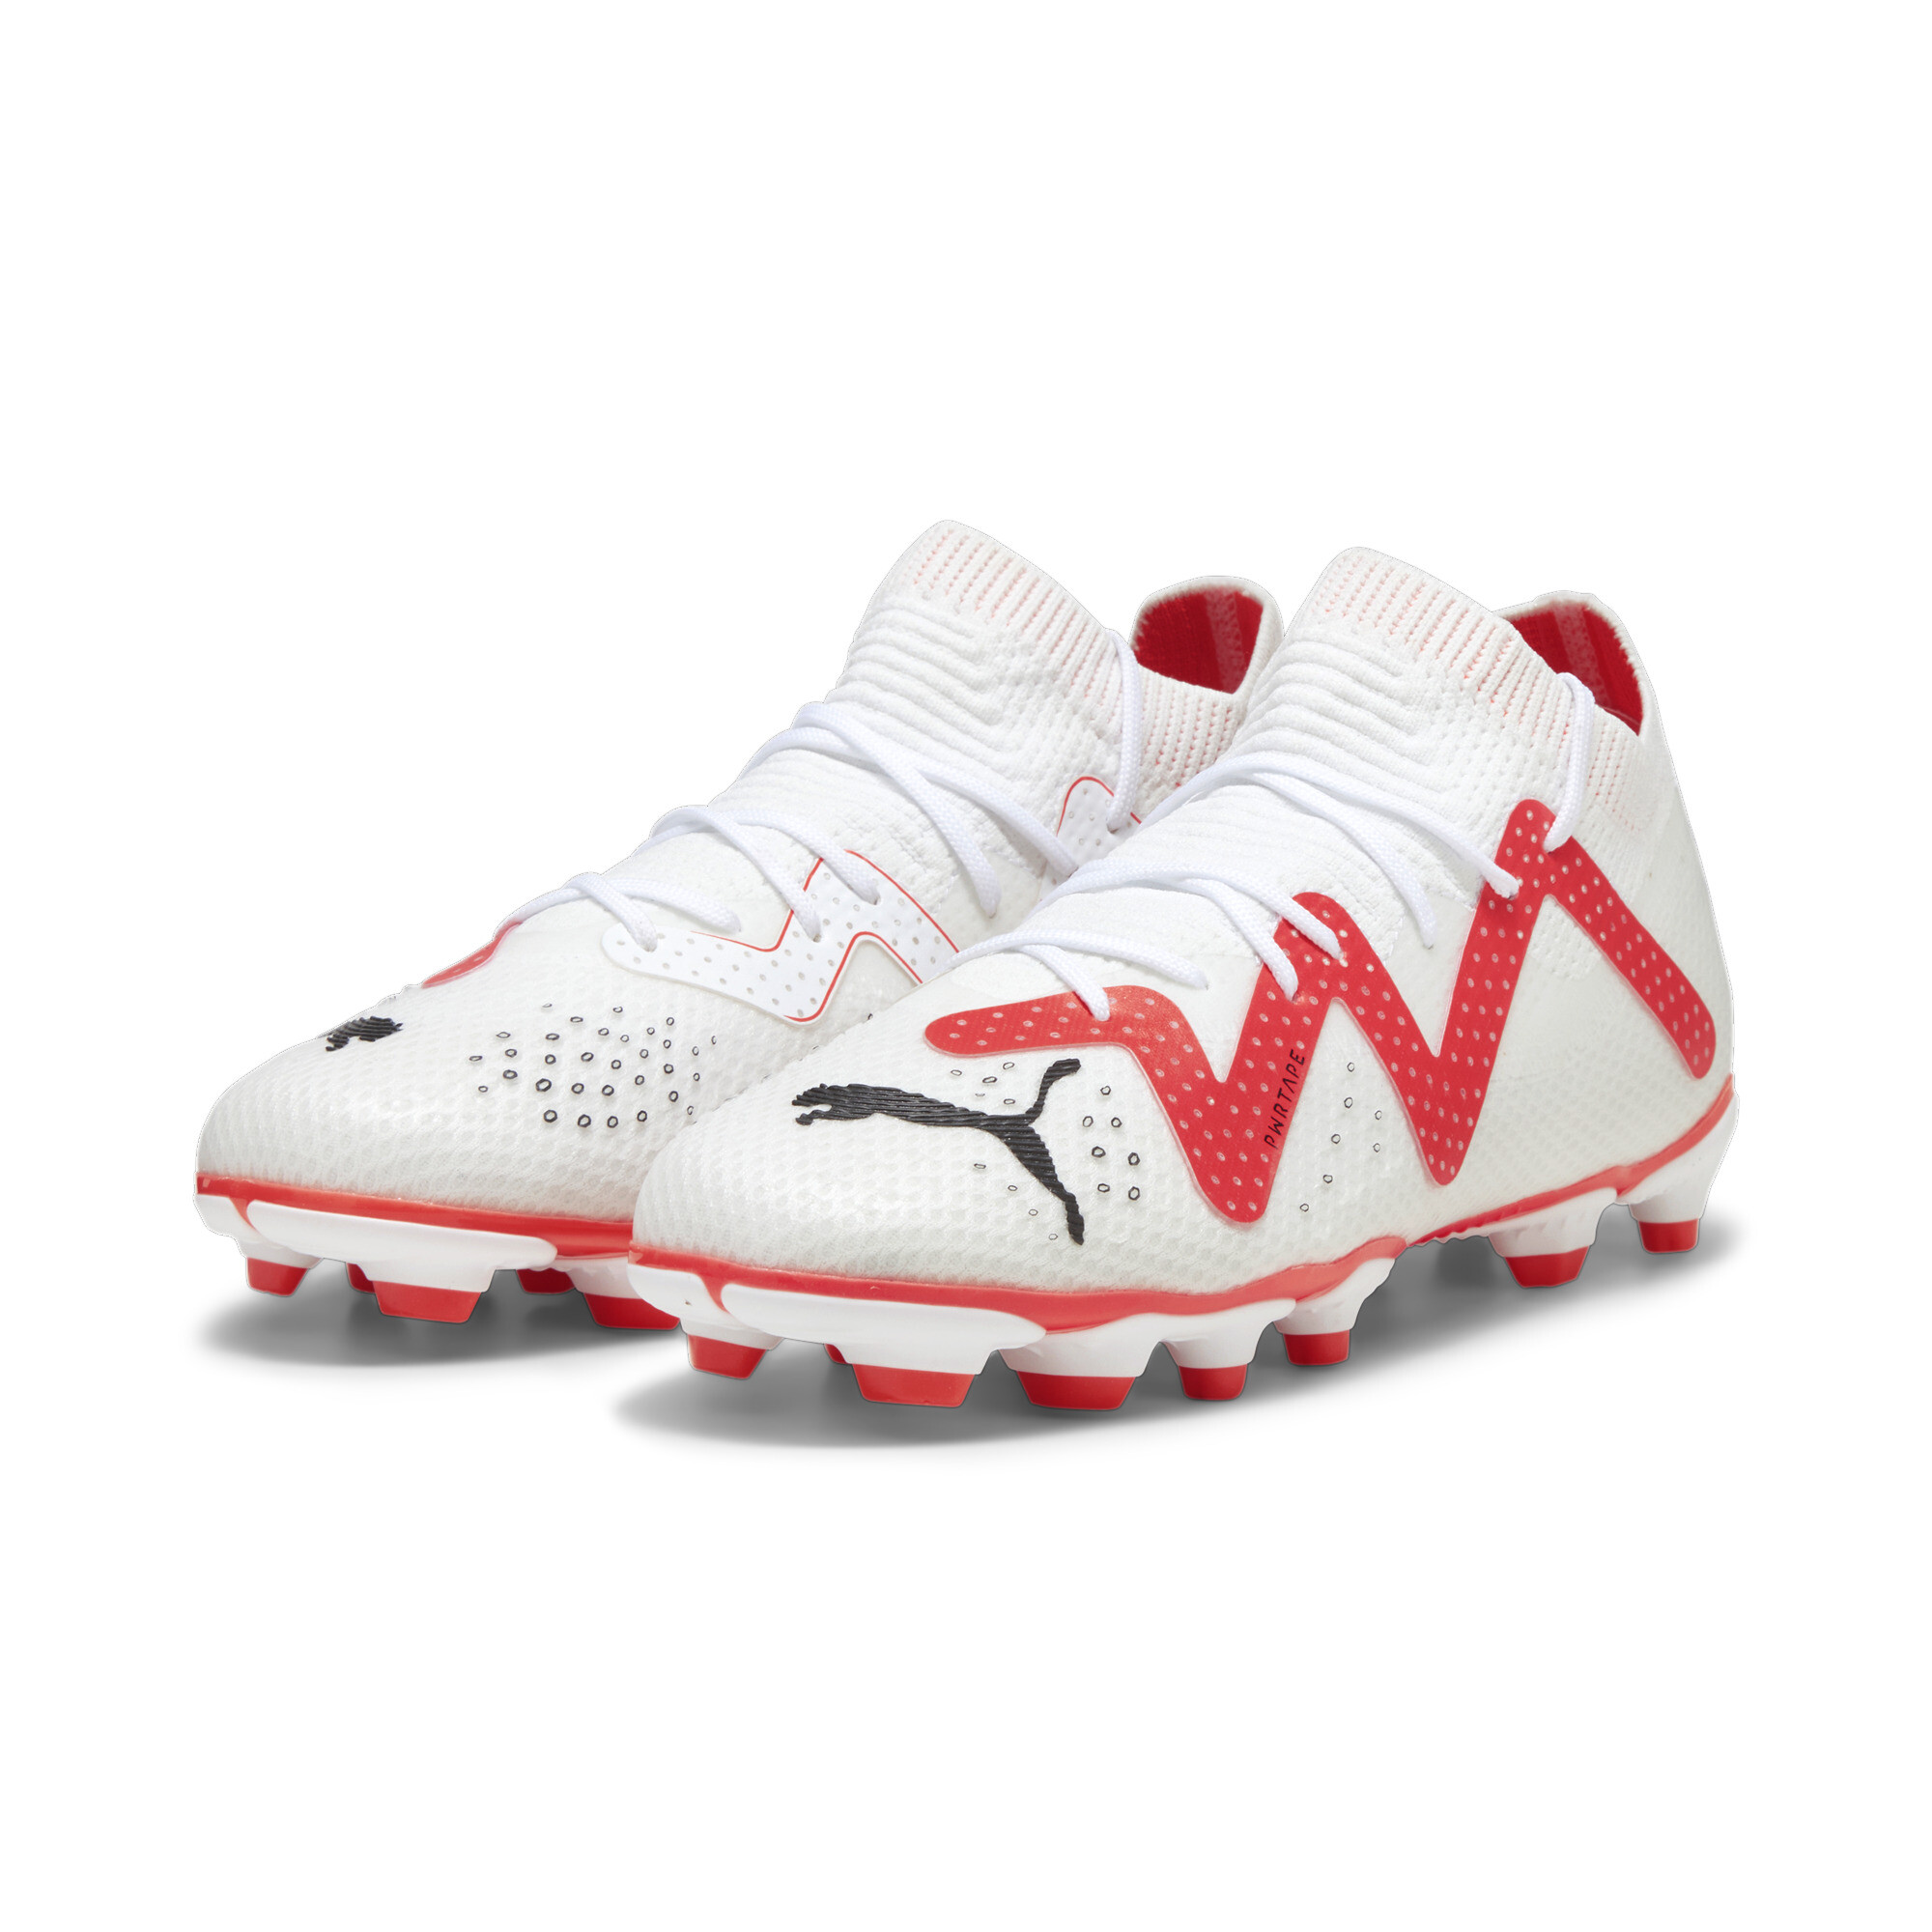 Puma FUTURE PRO FG/AG Youth Football Boots, White, Size 32, Shoes